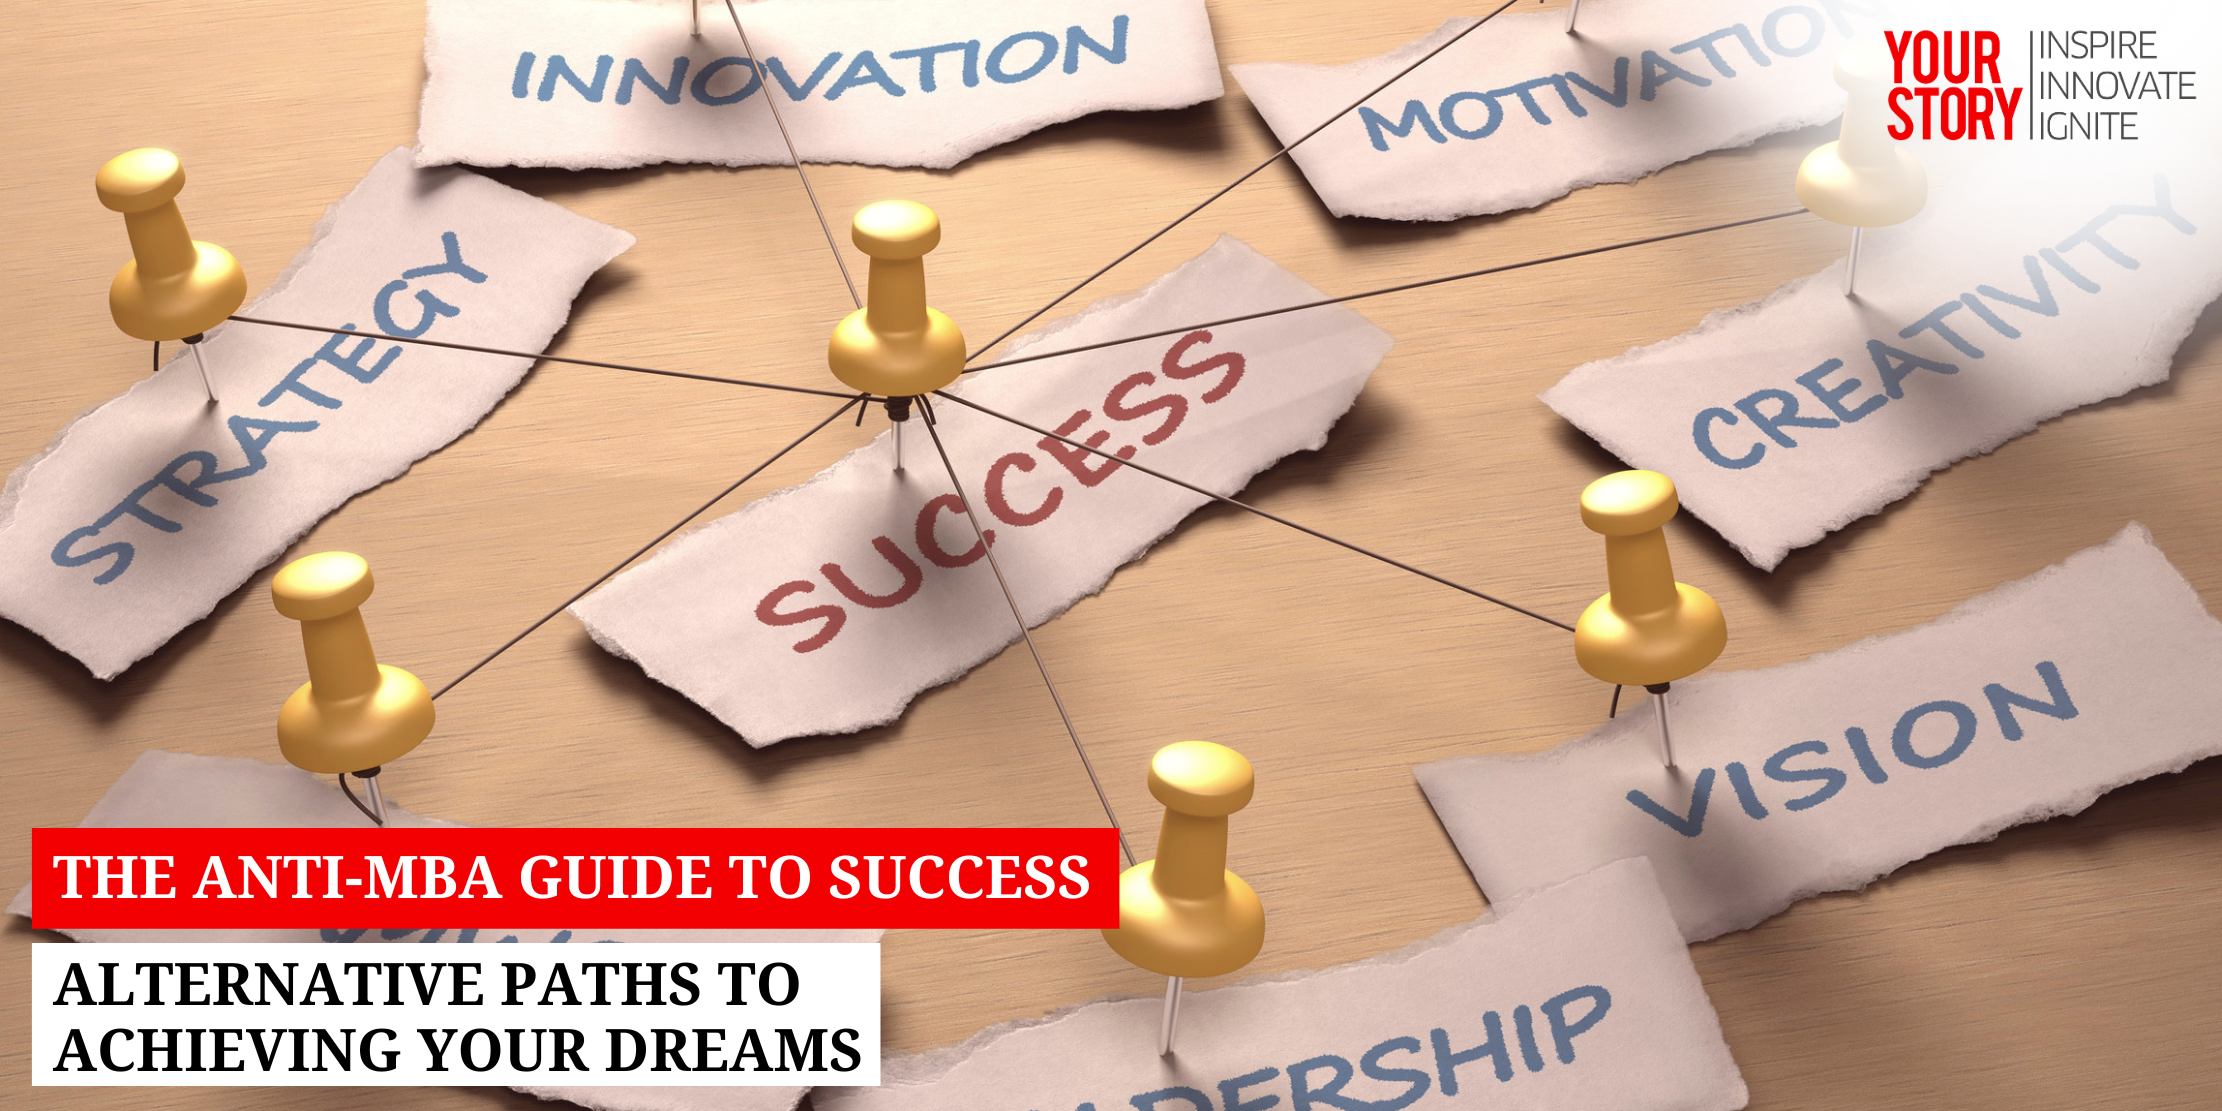 ⁠⁠The Anti-MBA Guide to Success: Alternative Paths to Achieving Your Dreams